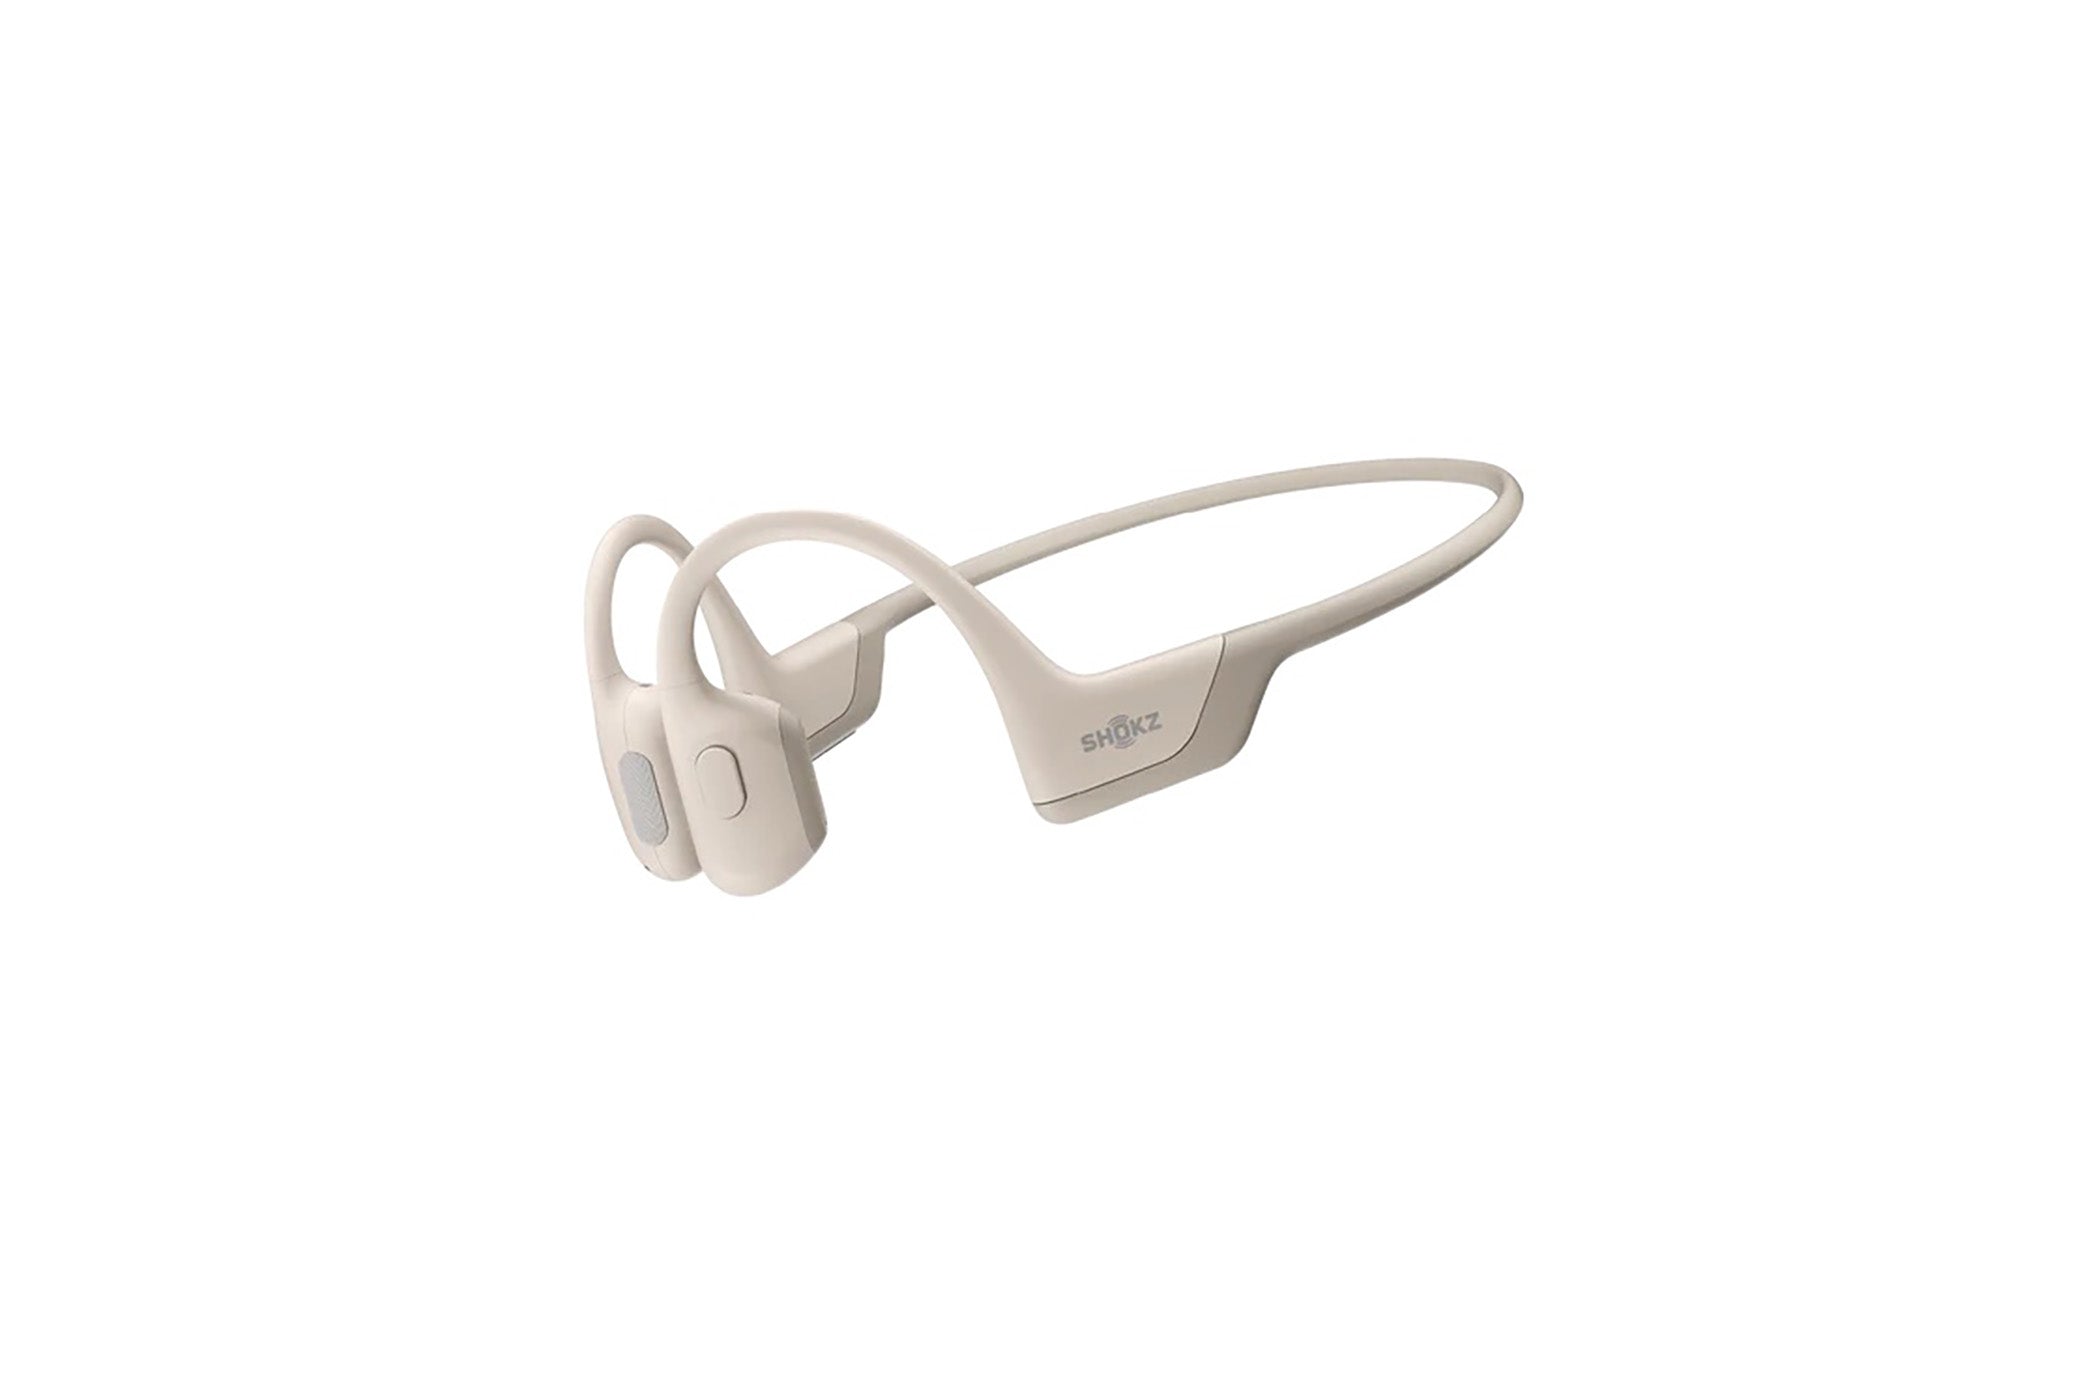 Save 50% on a pair of bone conduction headphones